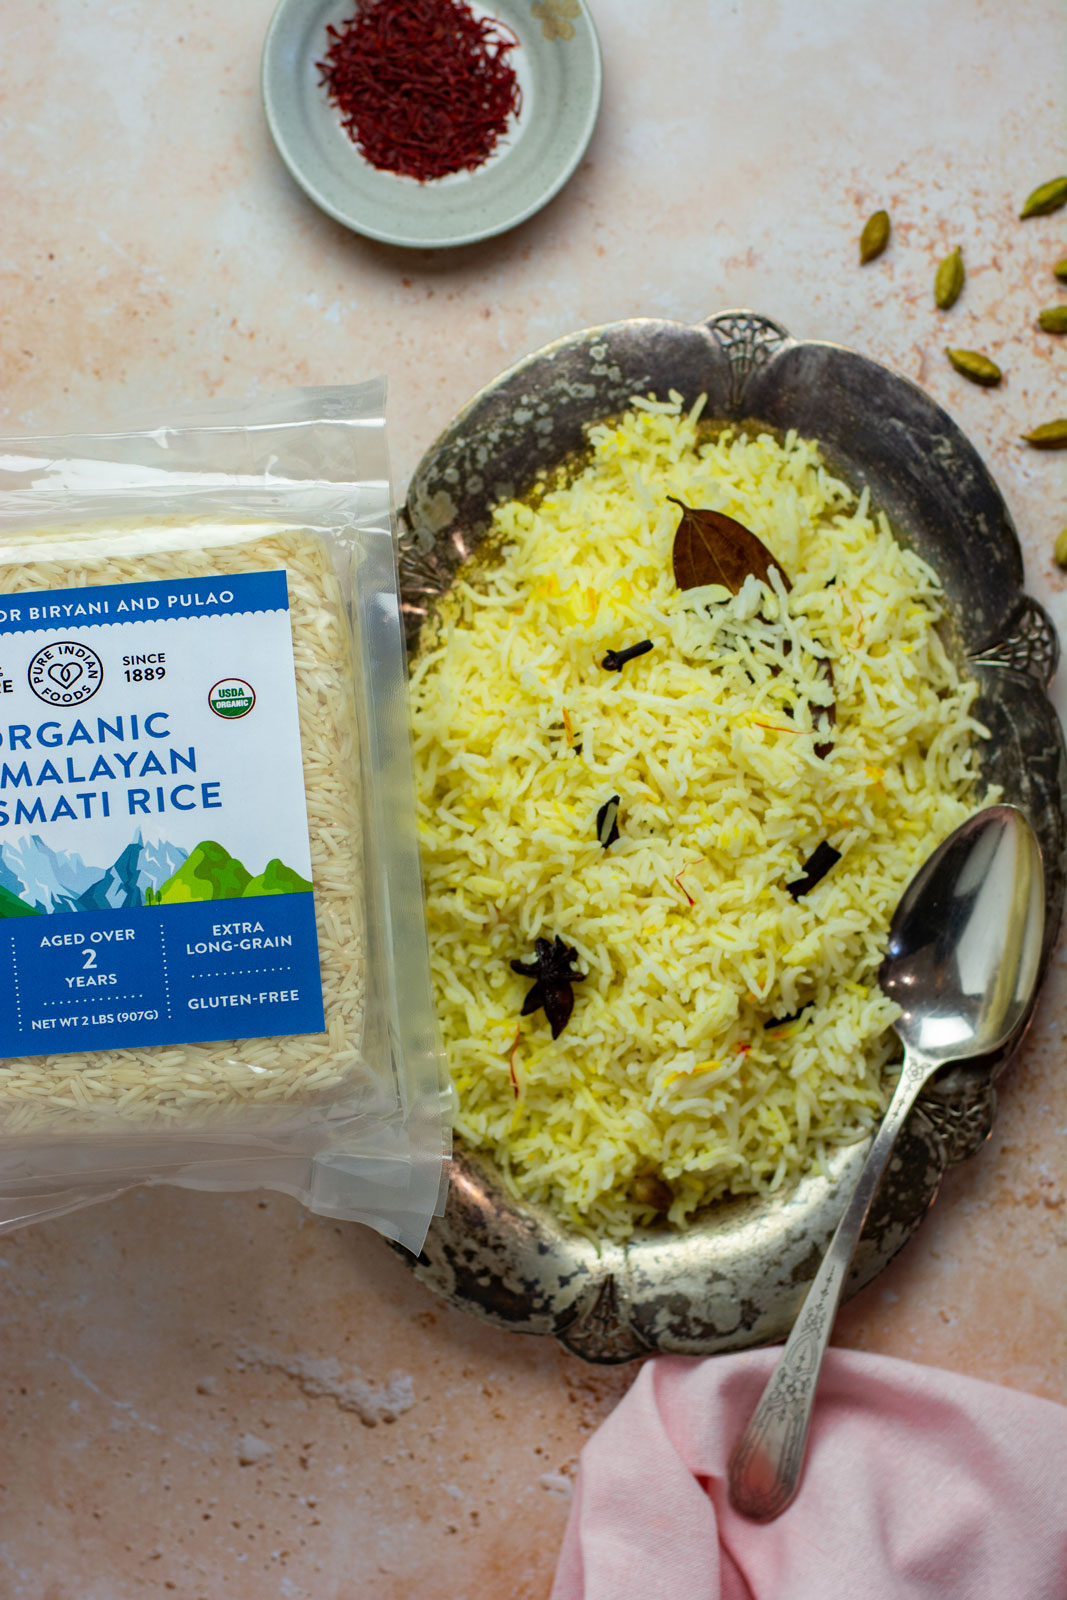 A bown of seasoned Indian rice made from Pure Indian Foods Organic Basmati Rice seasoned with our Organic Kashmiri Saffron. A package of the himalayan rice is next to it.